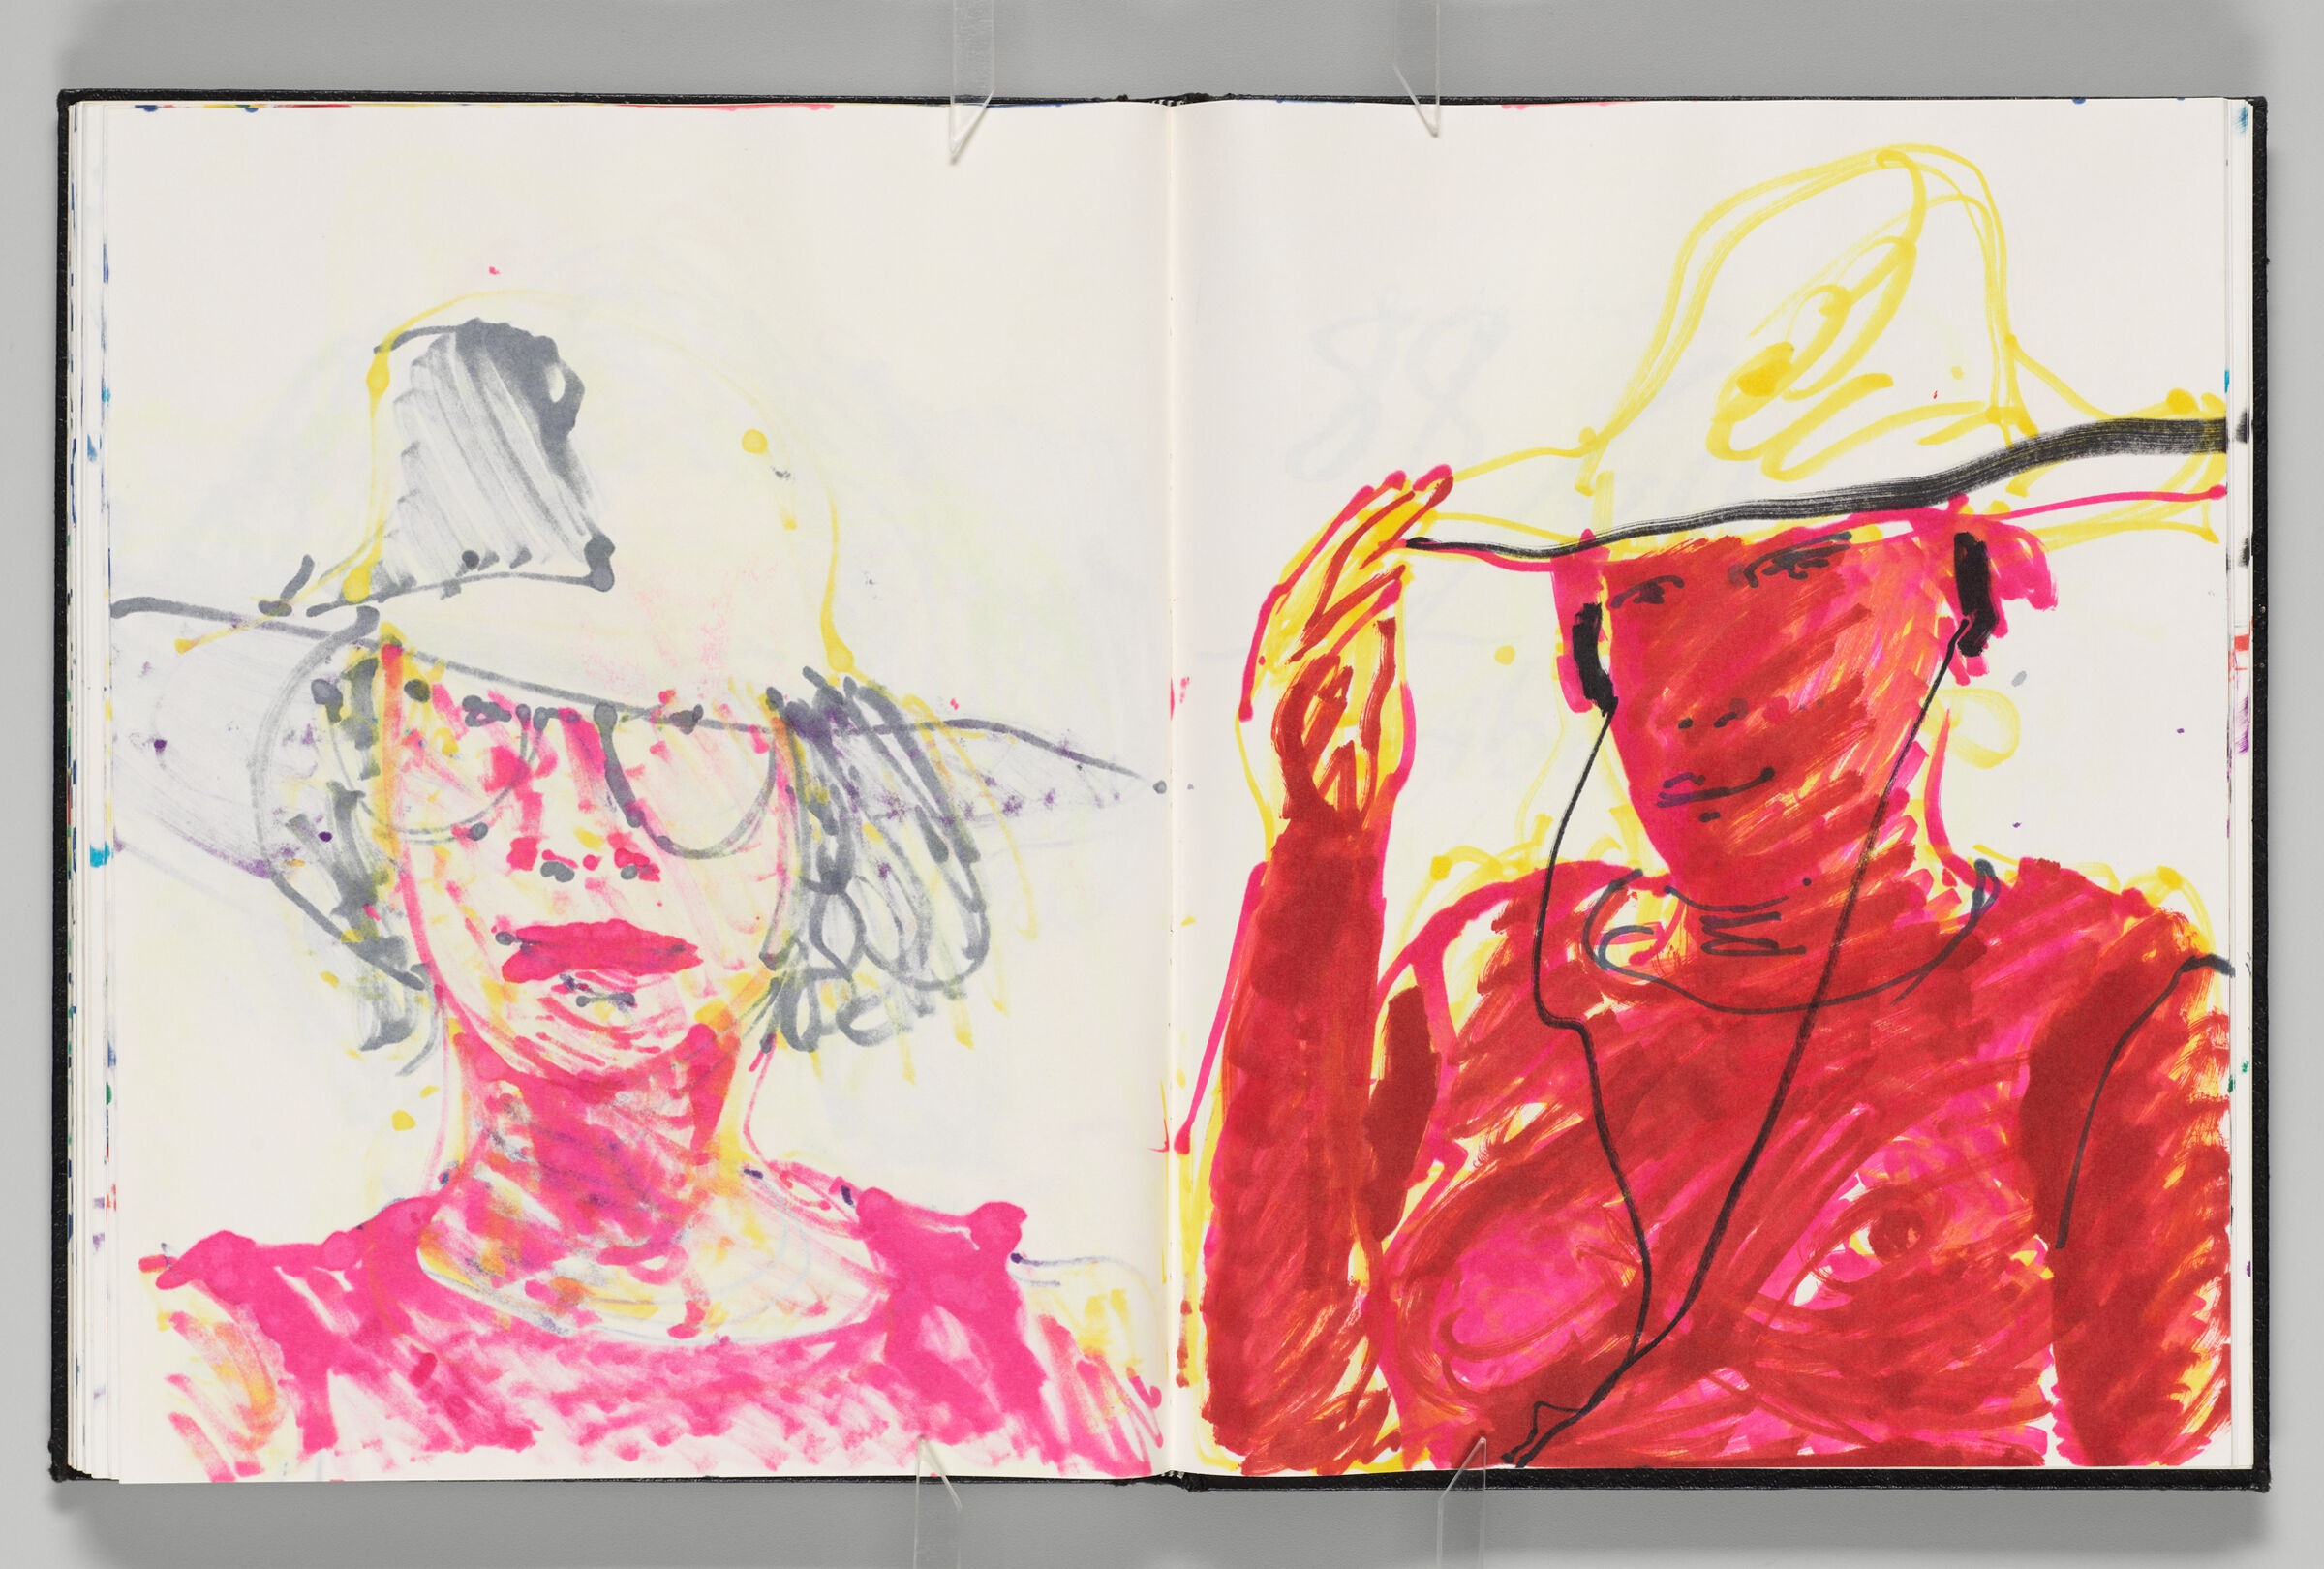 Untitled (Bleed-Through Of Previous Page, Left Page); Untitled (Frontal Portrait Of Female Figure In Hat With Headphones [Elizabeth], Right Page)